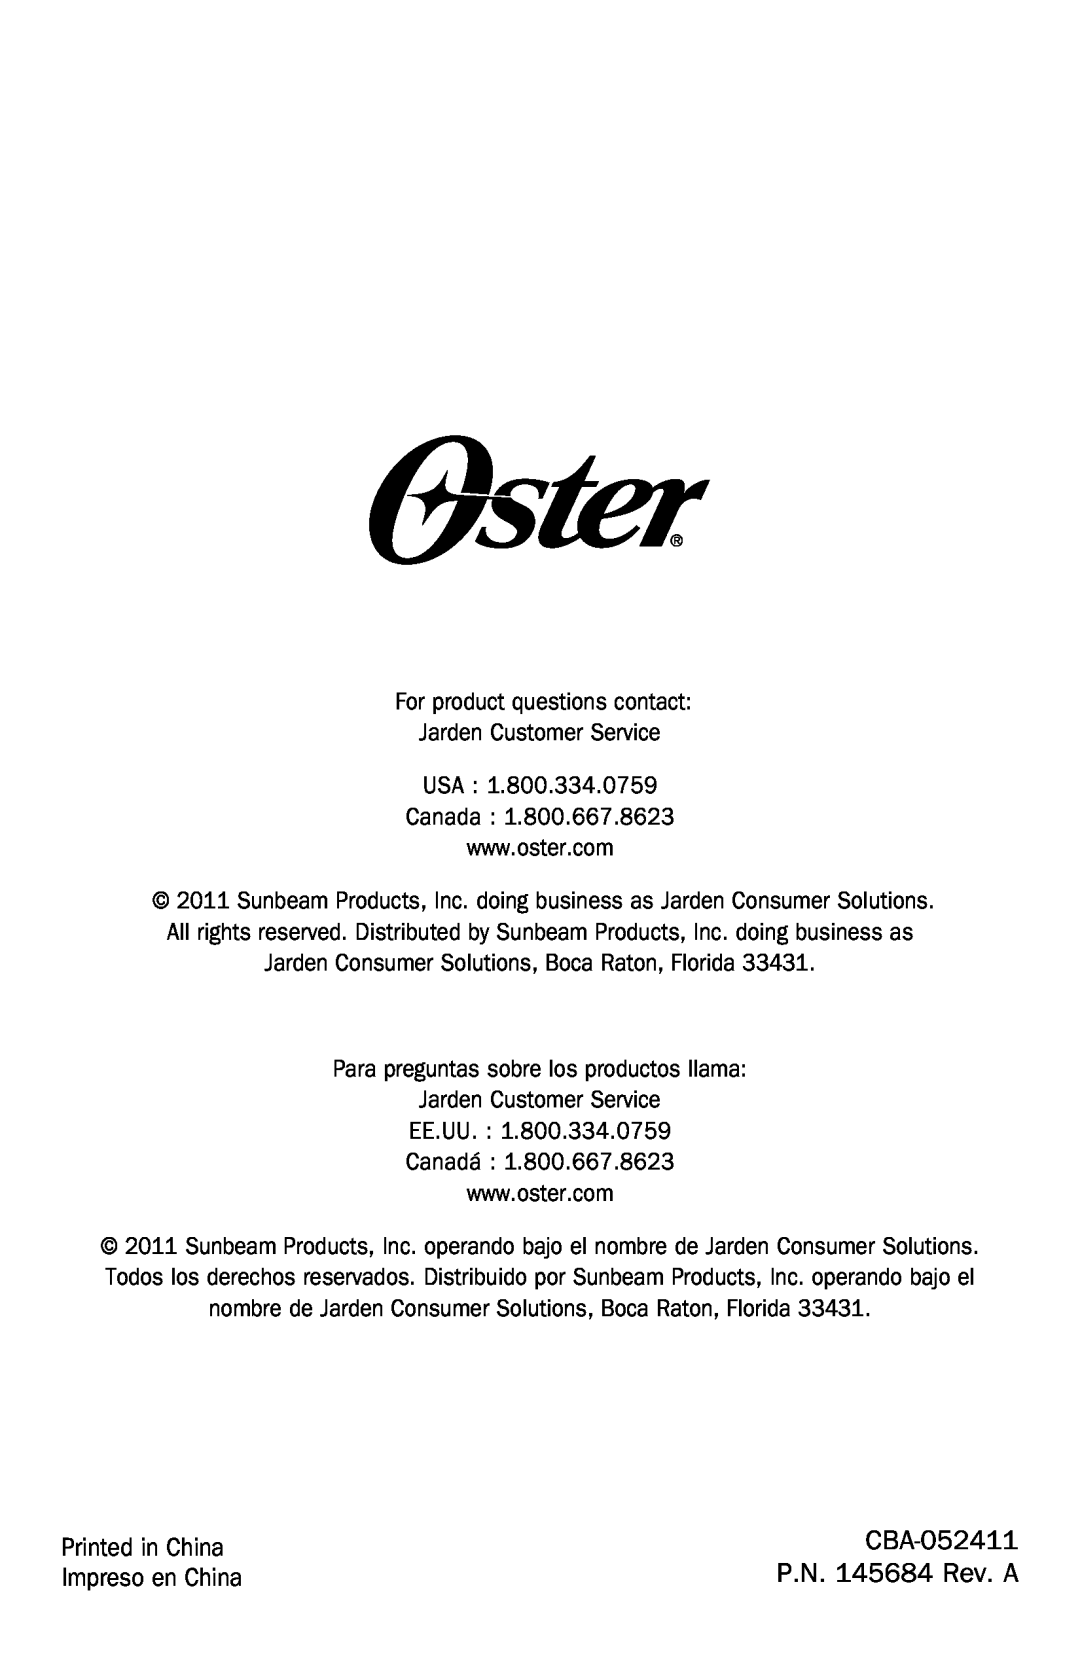 Oster TSSTJCPS01, TSSTJCPSR1, Oster Toaster CBA-052411, Impreso en China, P.N. 145684 Rev. A, For product questions contact 